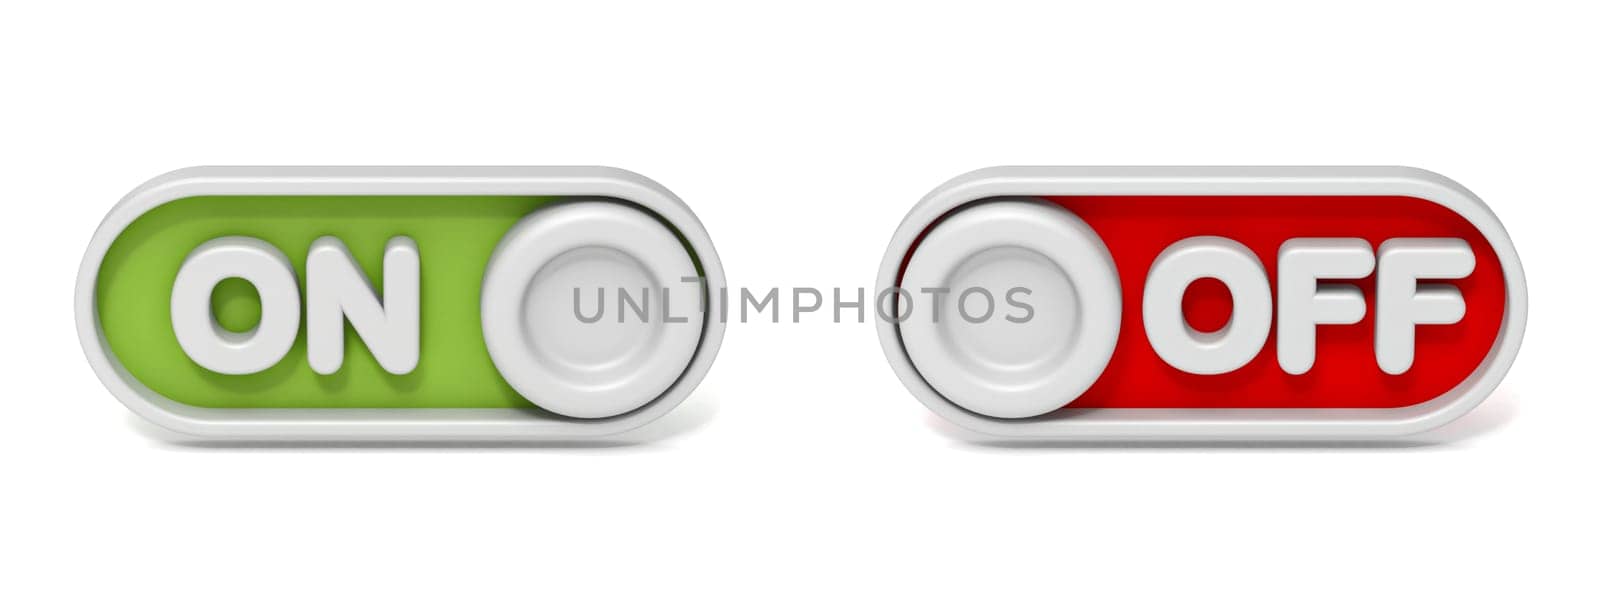 Green ON and red OFF button 3D rendering illustration isolated on white background